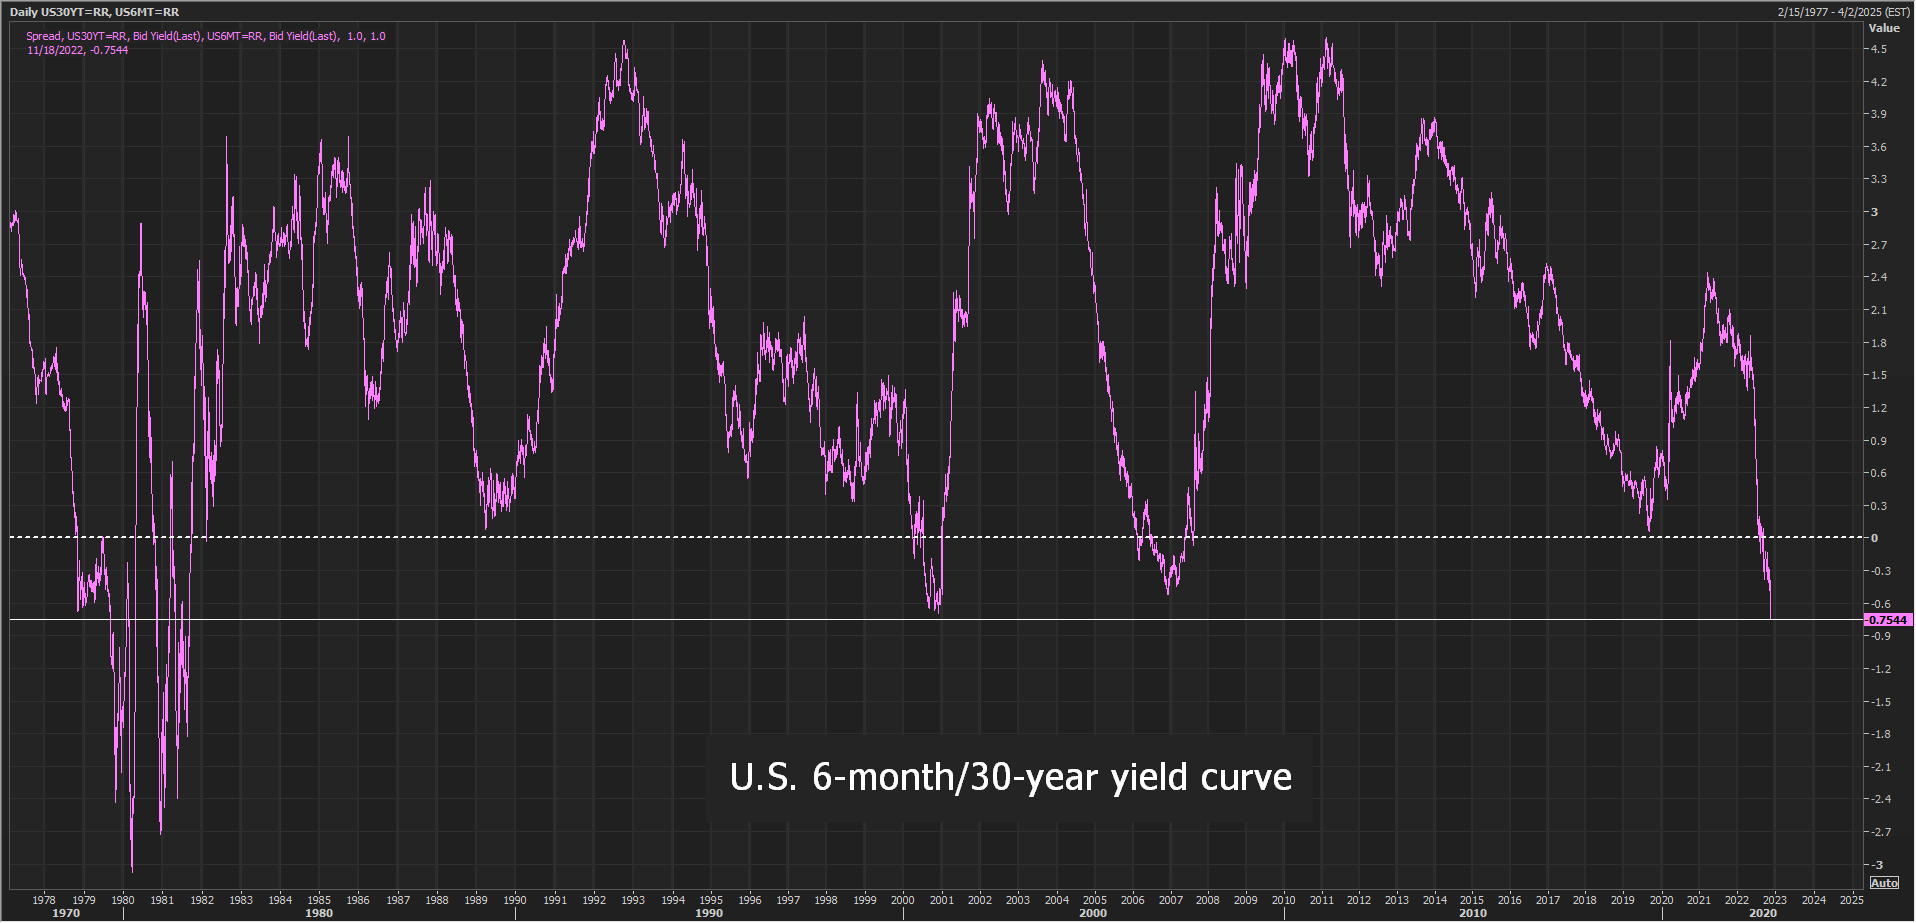 U.S. 6-month/30-year yield curve